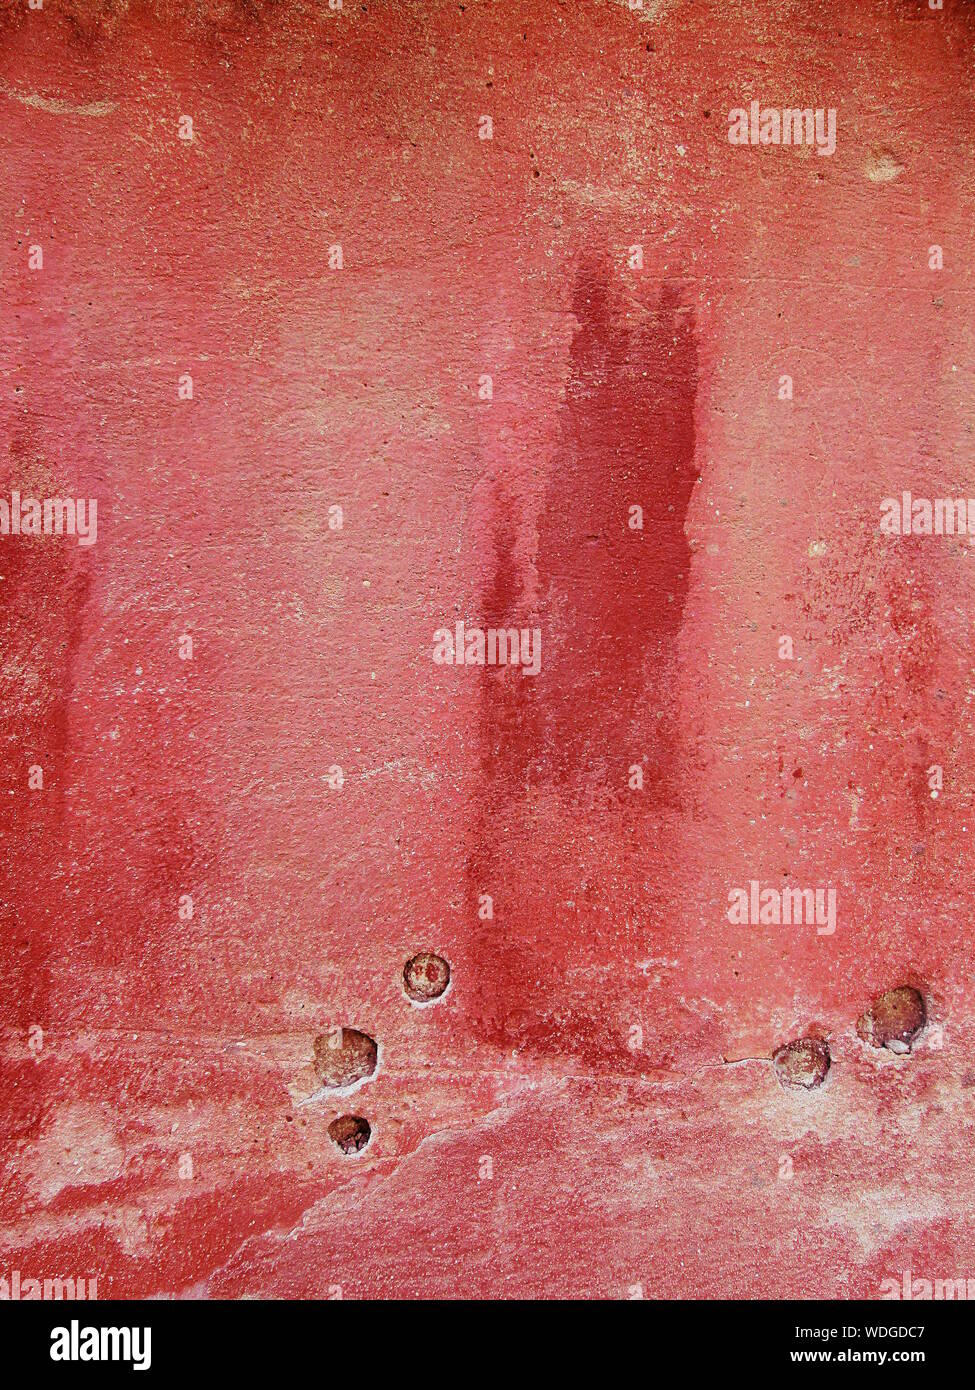 Full Frame Shot Of Red Damaged Concrete Wall Stock Photo